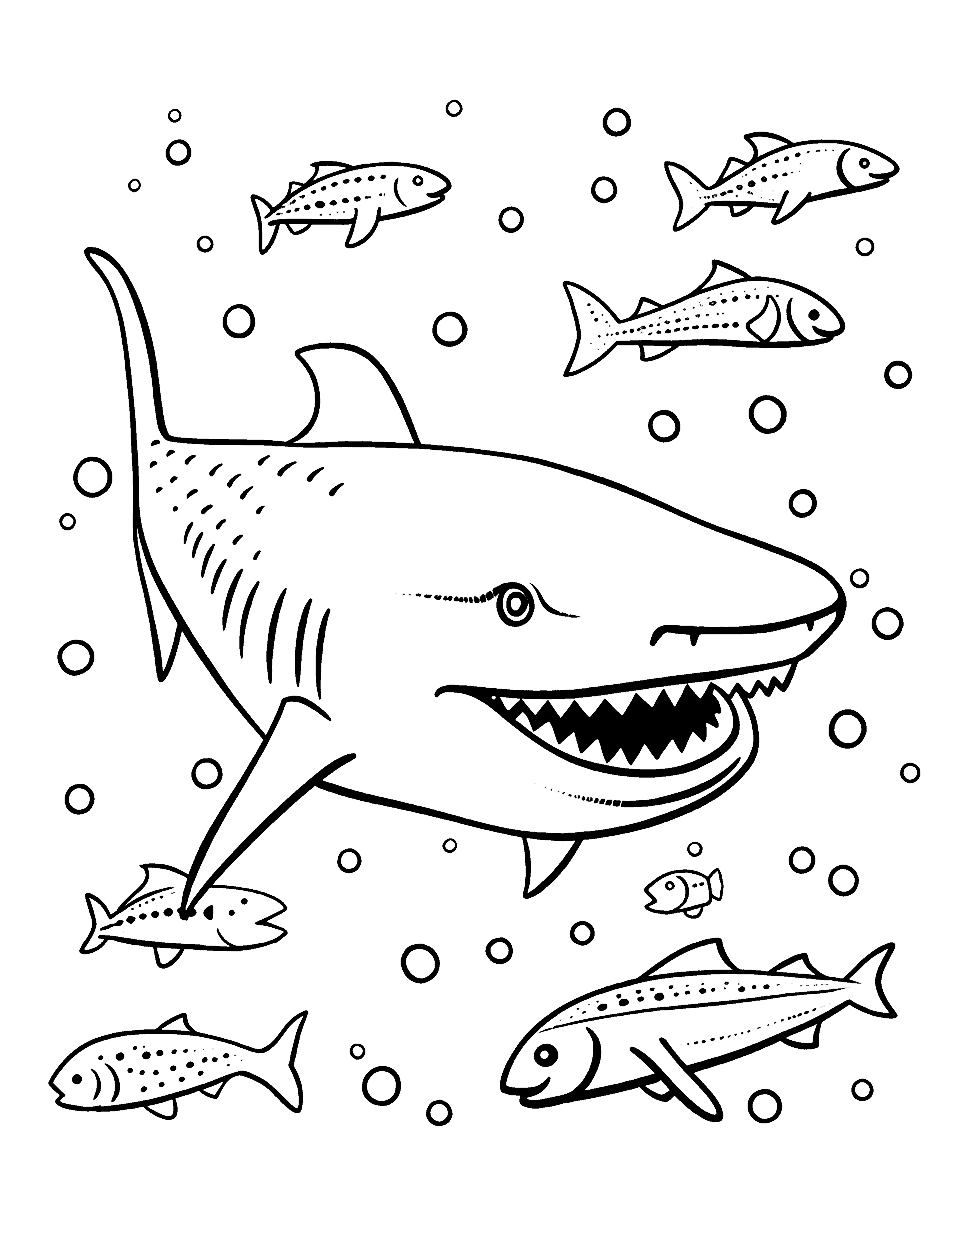 Whale Shark and Tiny Fish Coloring Page - A whale shark swimming with a group of tiny fish.